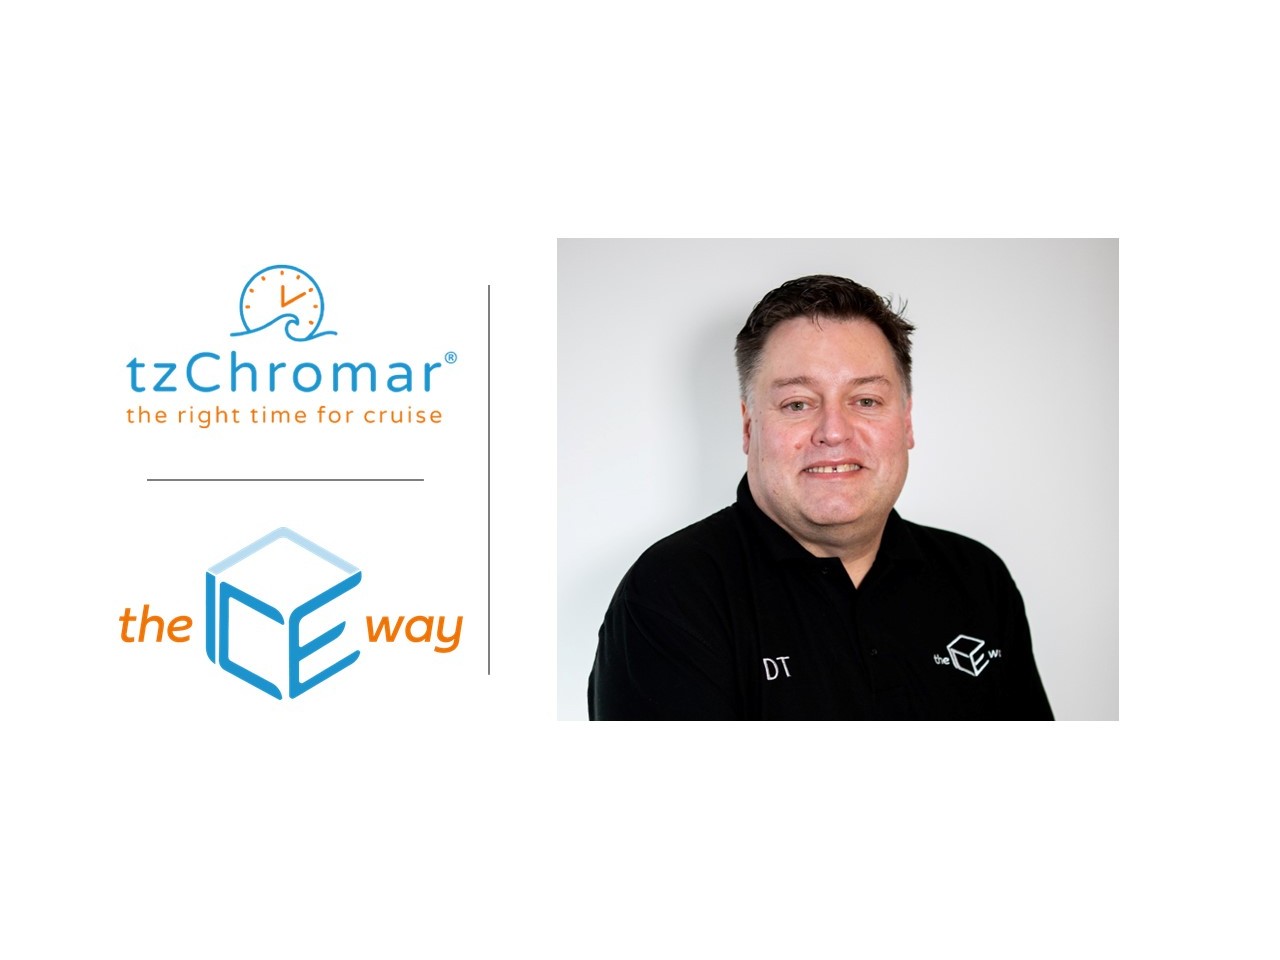 David Tibbles, Product Manager for theICEway's tzChromar IT Solution for cruise